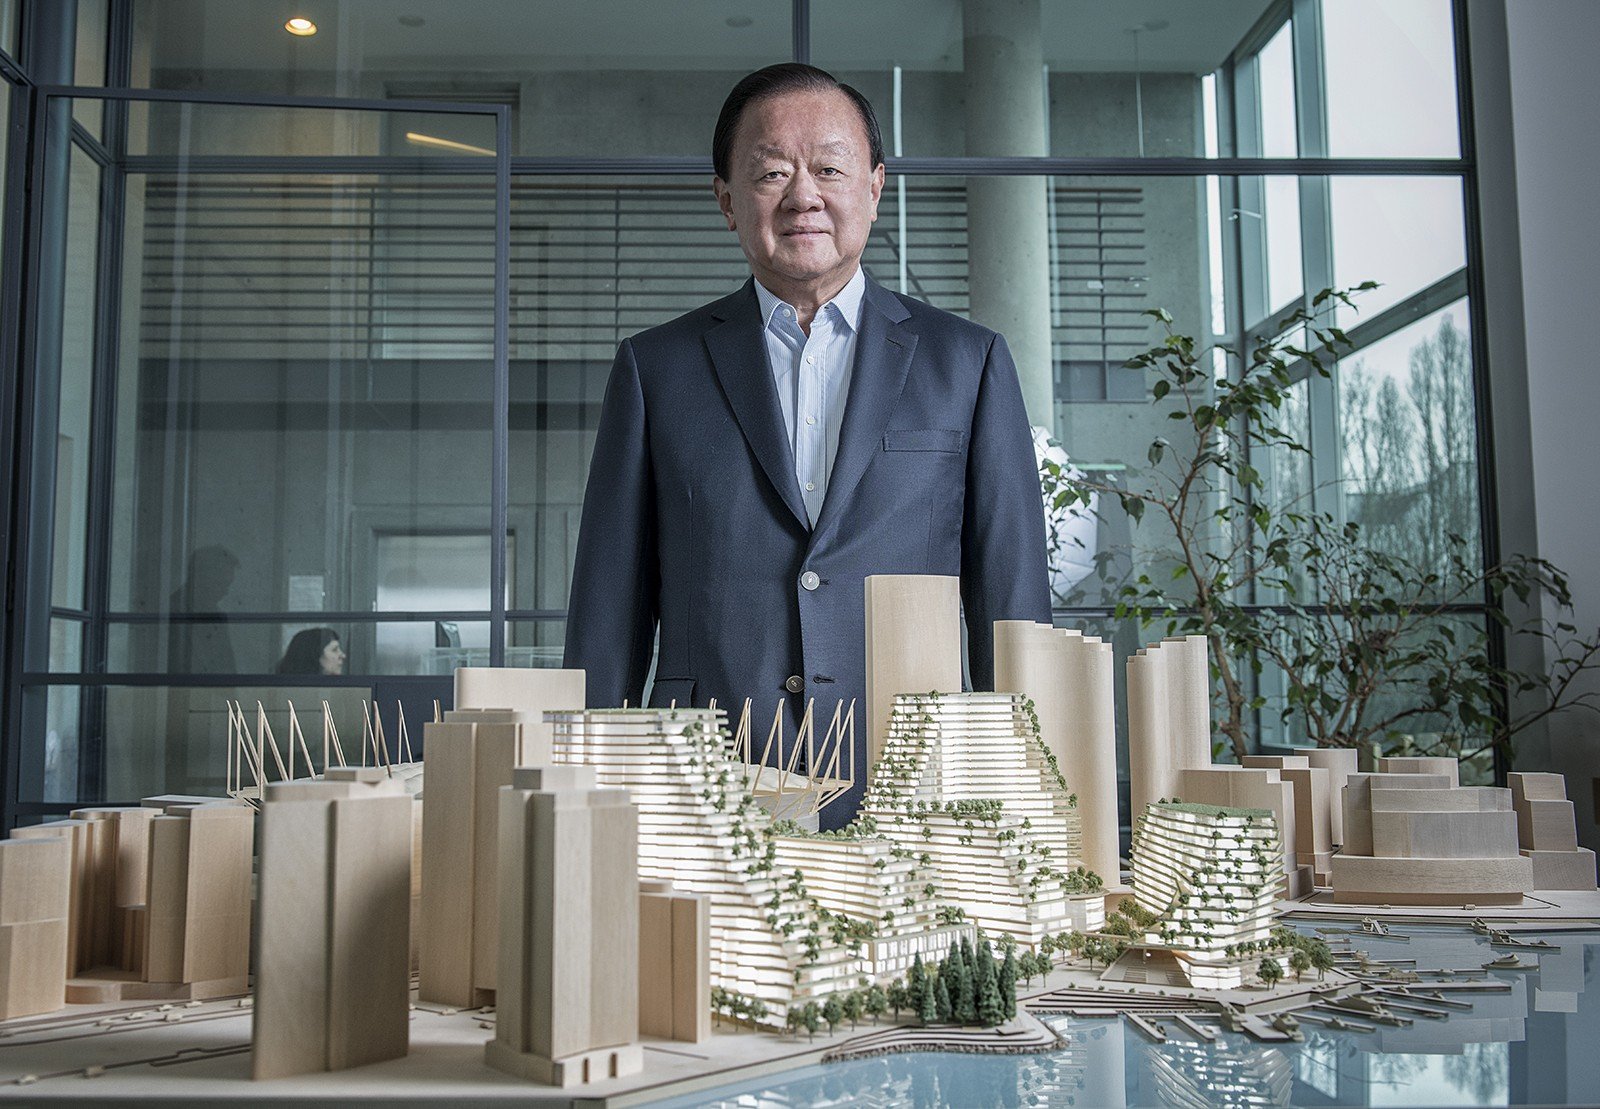 Singapore billionaire Oei Hong Leong and a model of his proposed development on the Plaza of Nations site on Vancouver's waterfront. Photo: Mata Press Service